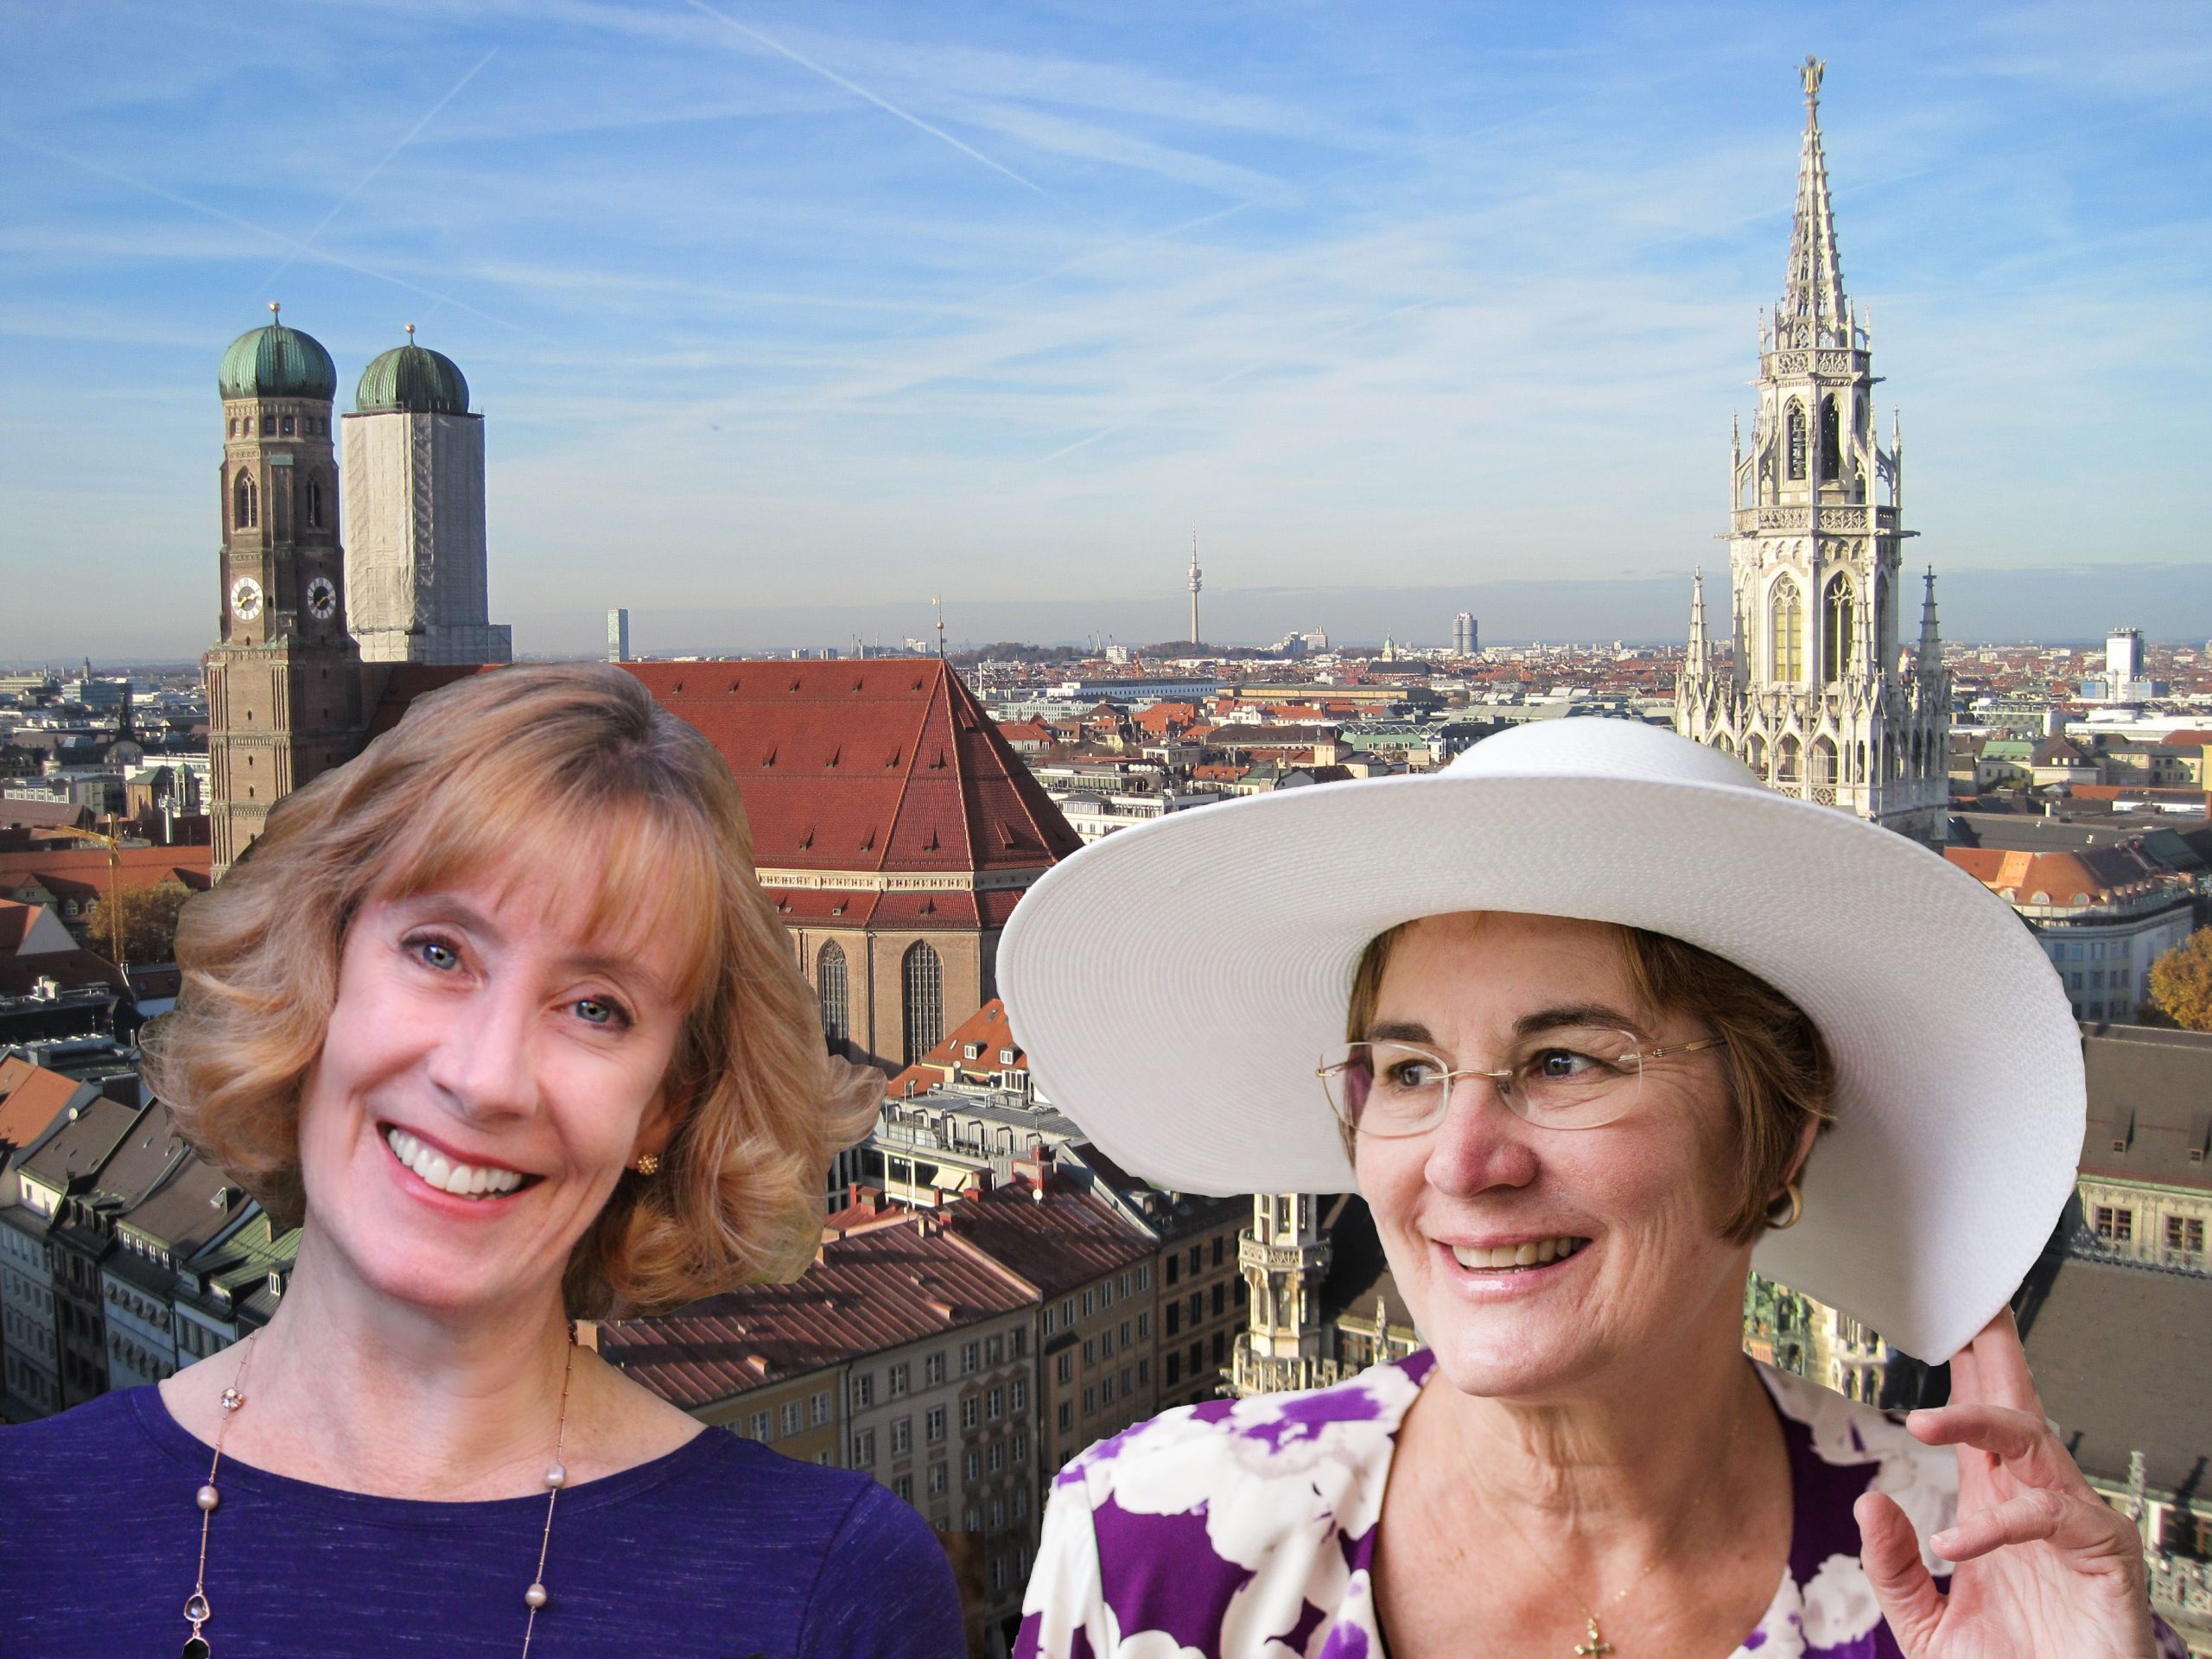 Marienplatz and the Neues Rathaus, viewed from the tower of St. Peterskirche, with travel buddy Michelle Ule (Photo courtesy of Morgan Tarpley Smith)